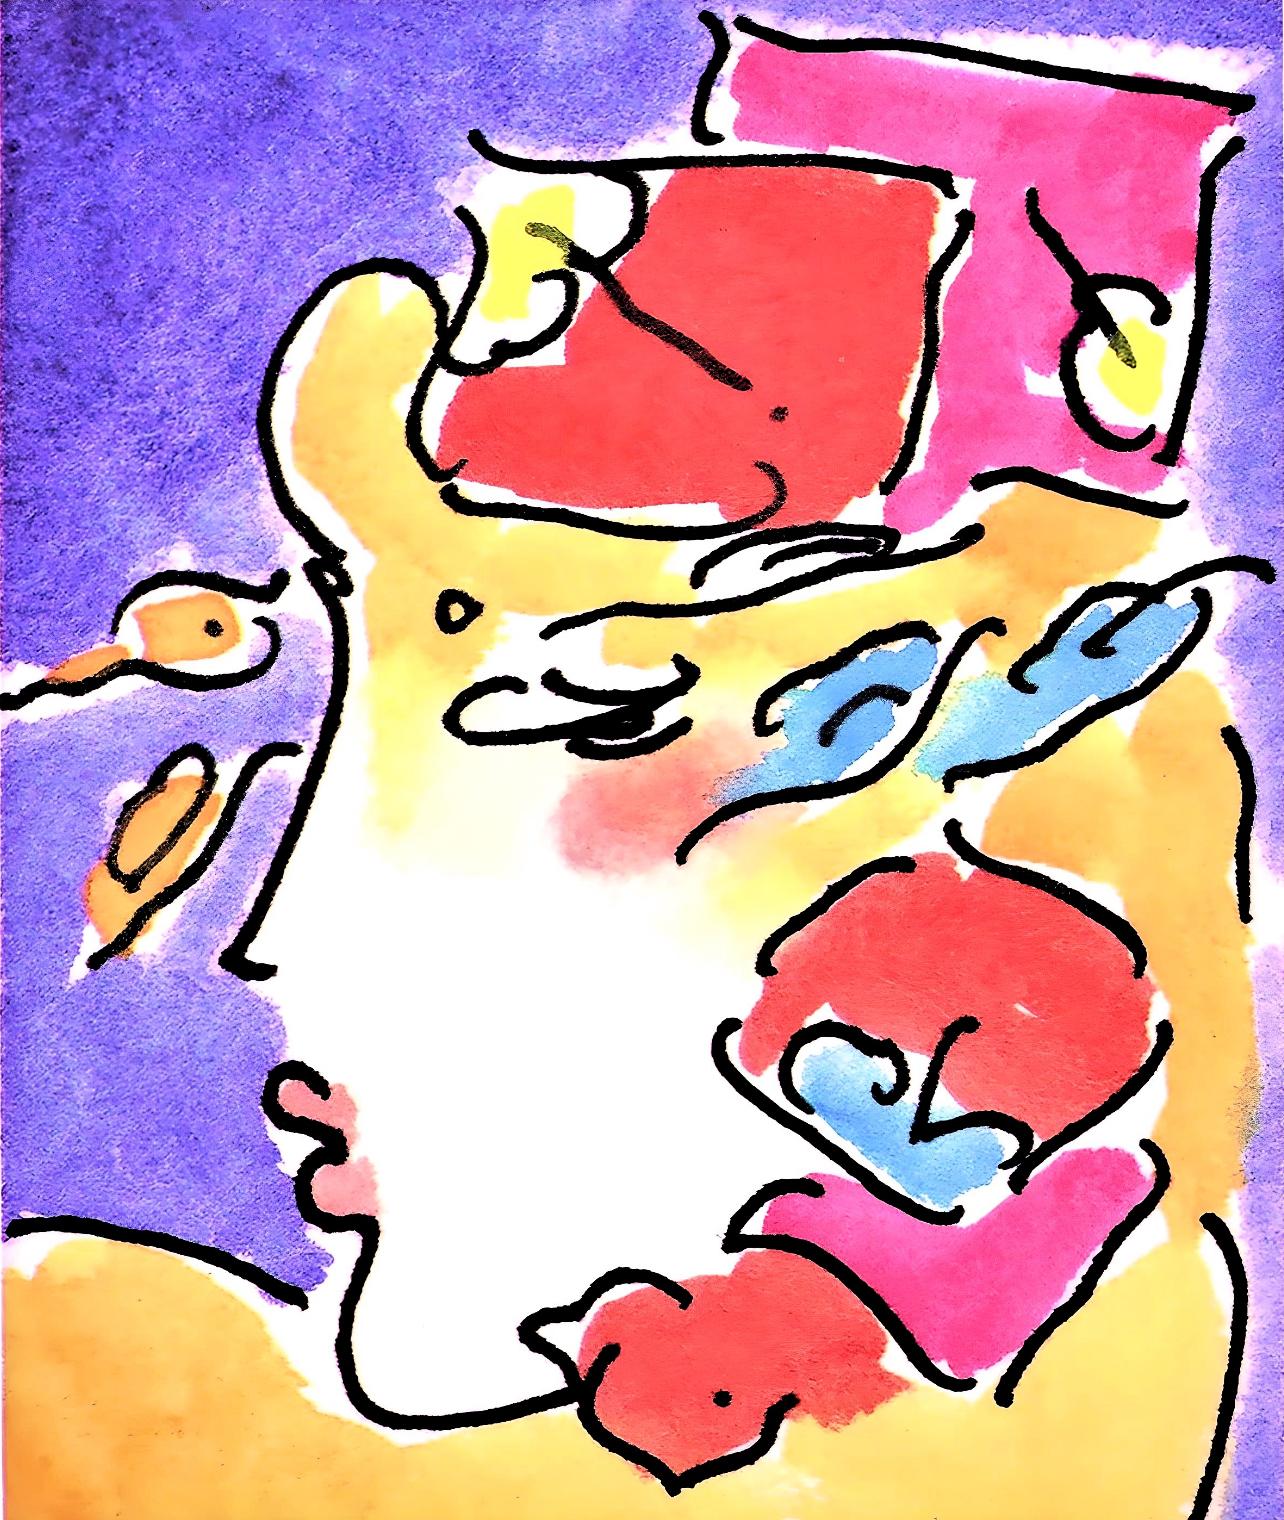 Artist: Peter Max (1937)
Title: Profile Series I
Year: 1998
Edition: 140/300, plus proofs
Medium: Lithograph on Coventry Smooth paper
Size: 9 x 7.5 inches
Condition: Excellent
Inscription: Signed and numbered by the artist.
Notes: Published by Via